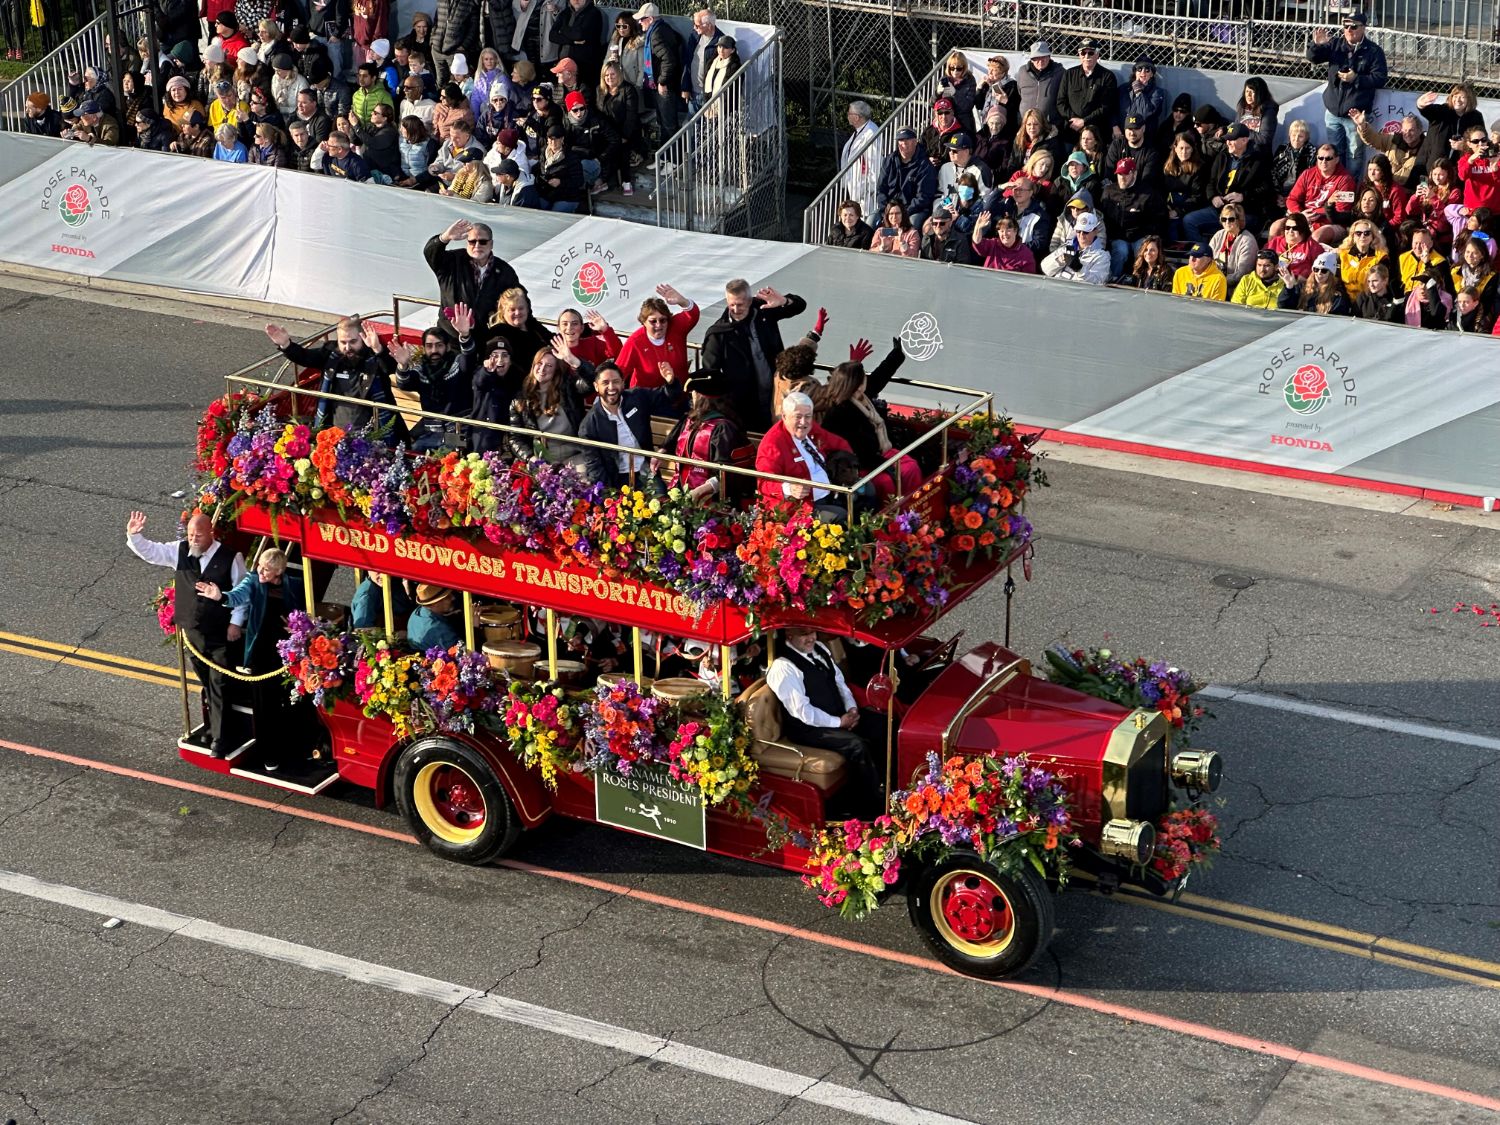 PHOTO: Bill Glazier | The South Pasadenan | Tournament of Roses President Alex Aghajanian, wearing red coat, is joined by family and friends aboard colorful vehicle.